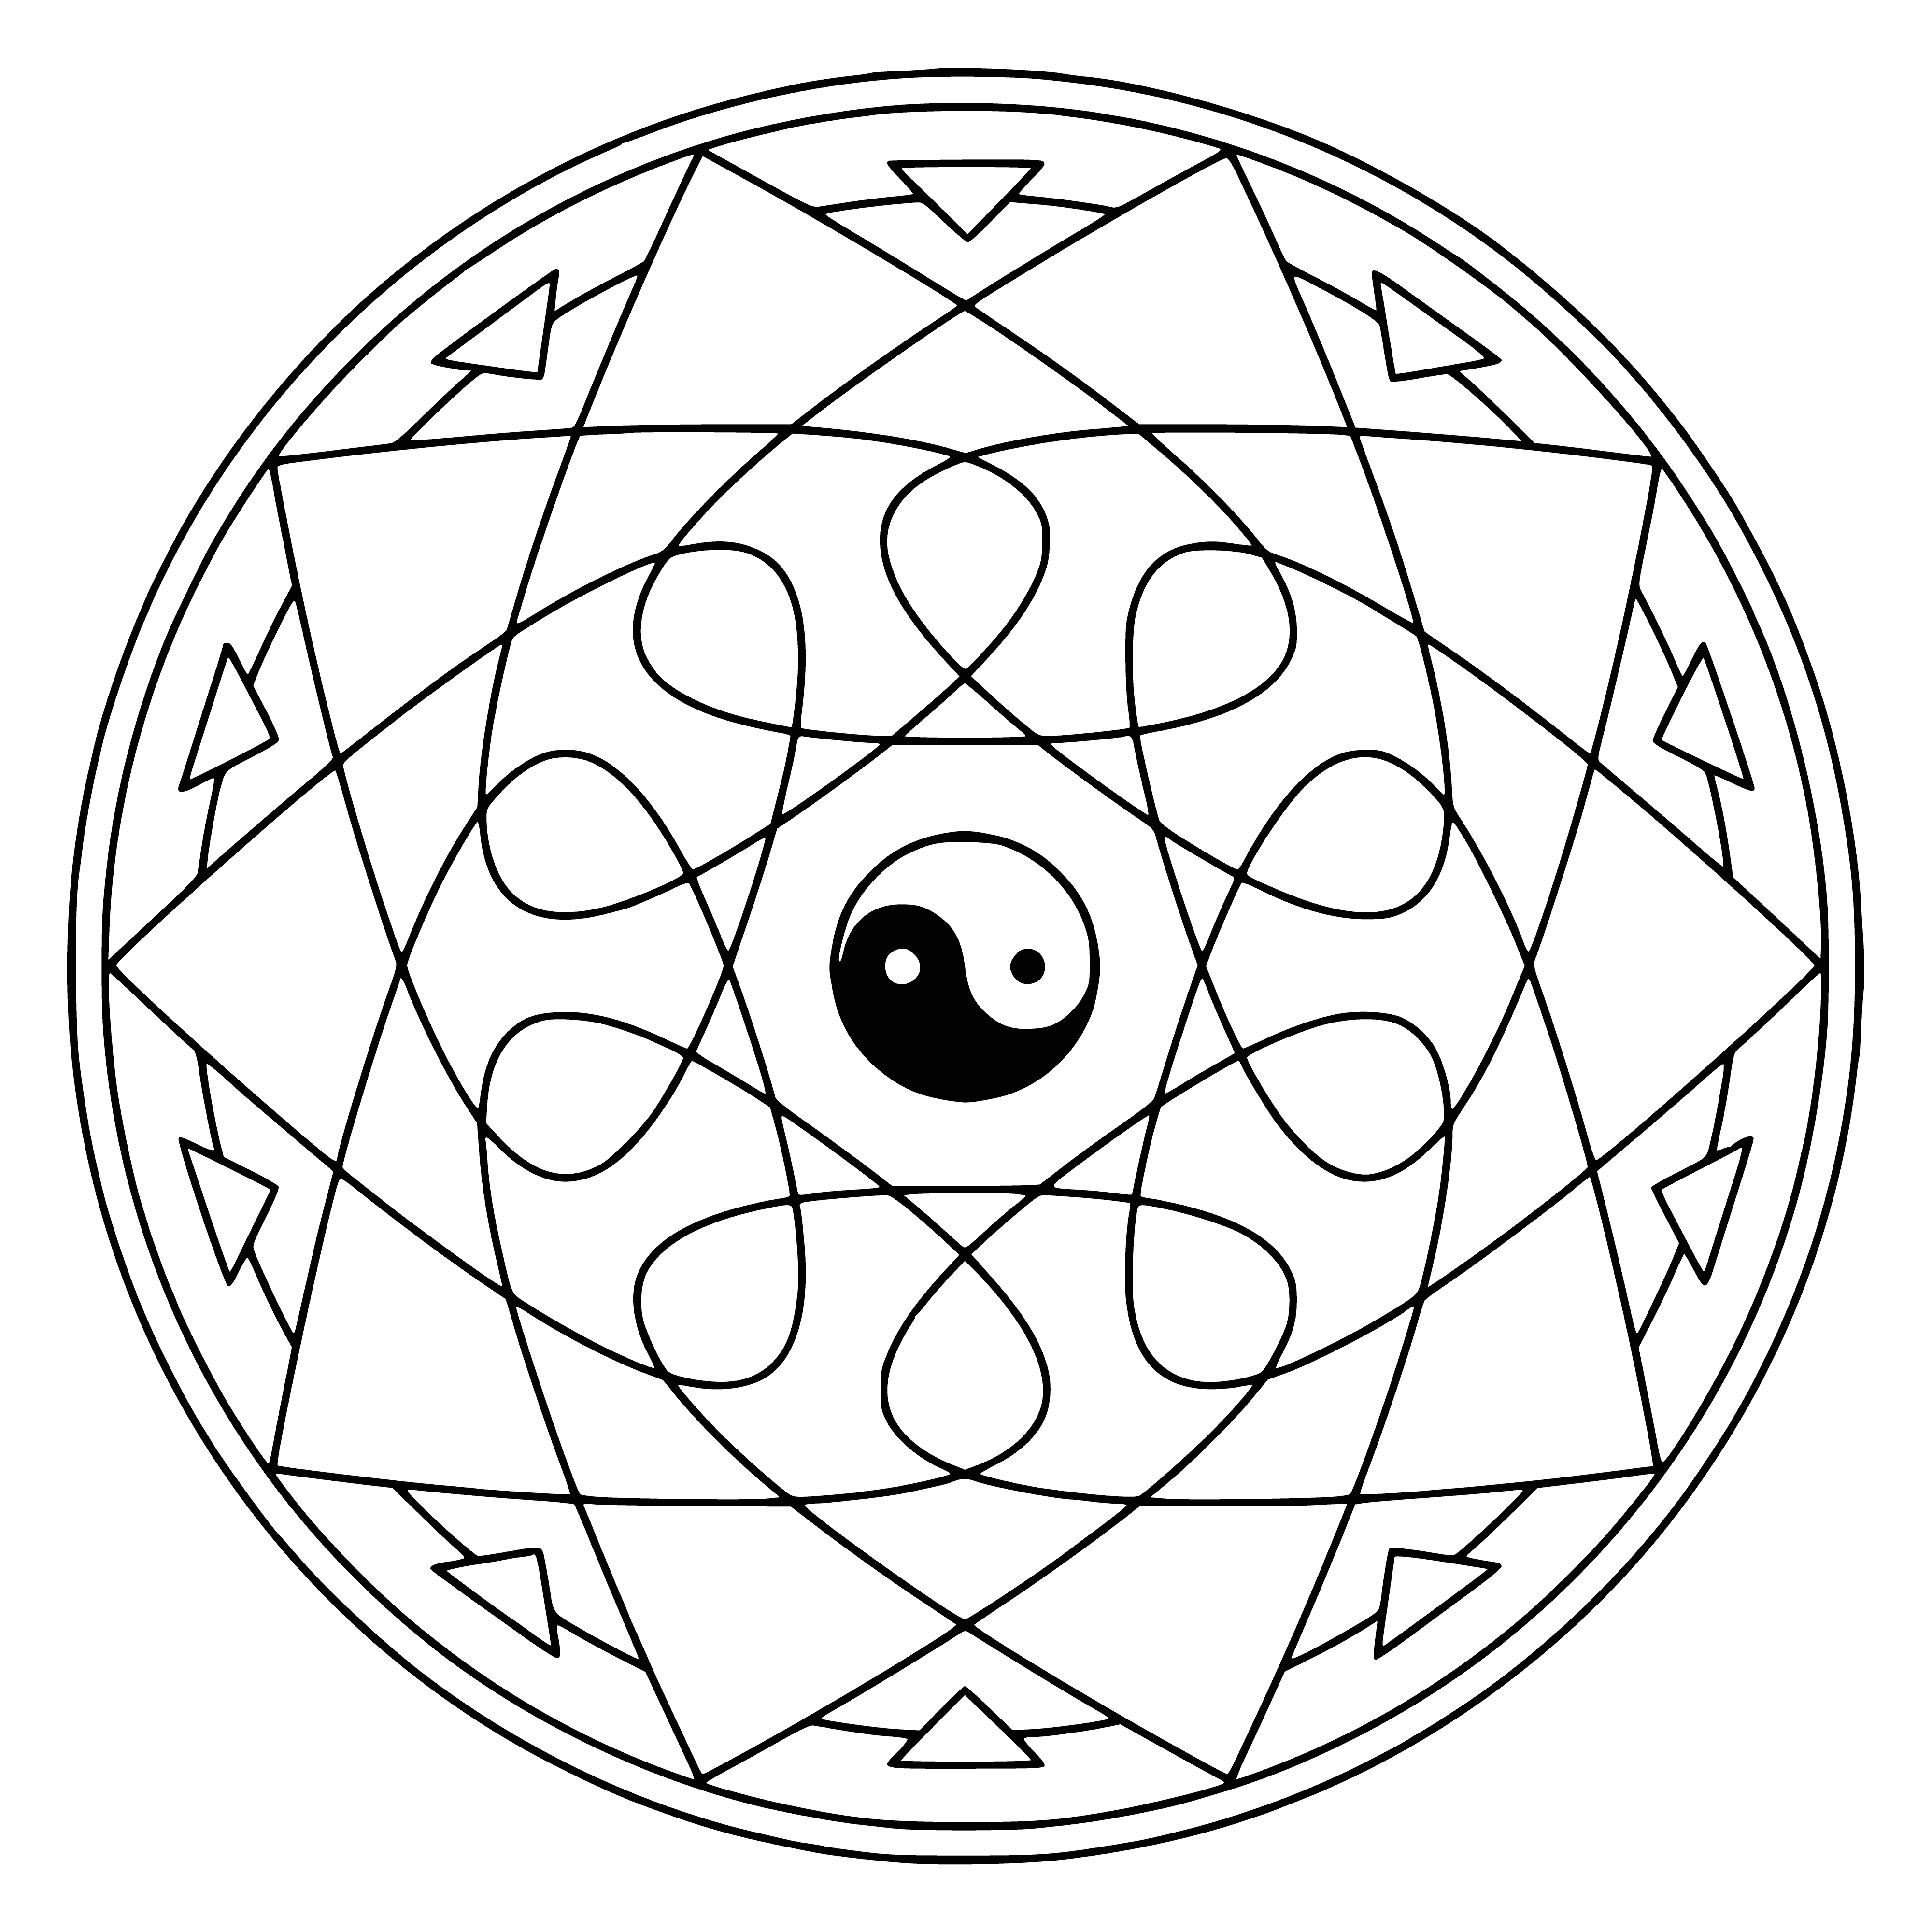 coloring page: Mandala is a sacred symbol used in Hinduism & Buddhism, representing universe & path to enlightenment. Often includes yin-yang, signifying balance of opposites.